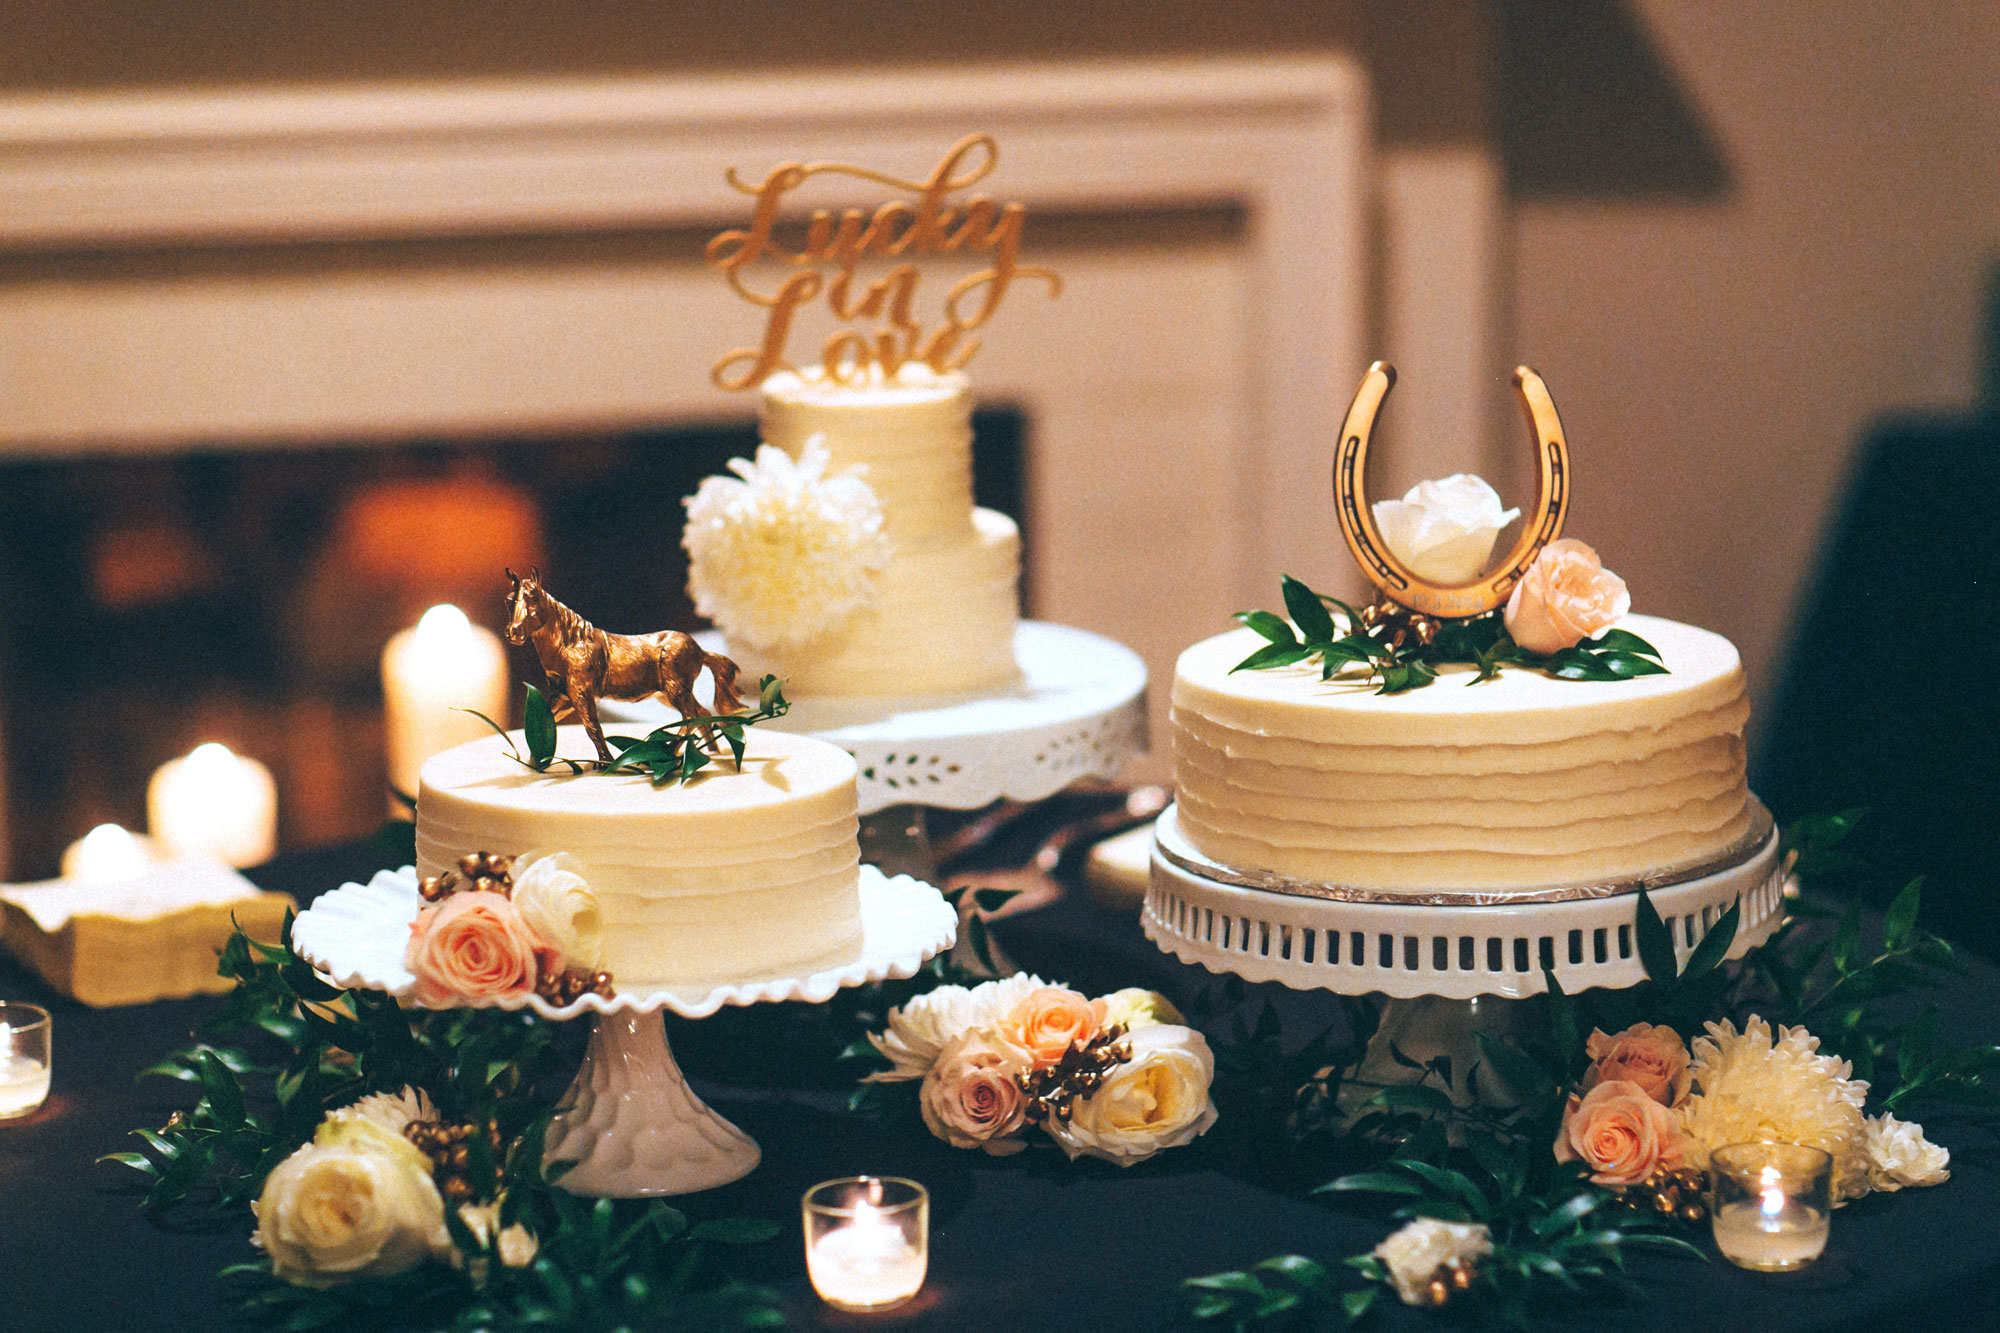 Me & Mr. Jones Wedding, Equestrian Inspired Decor, Three Separate Cakes, Lucky In Love Cake Topper, Gold Horse Cake Topper, Horseshoe with Wedding Date Cake Topper, Funfetti Wedding Cake